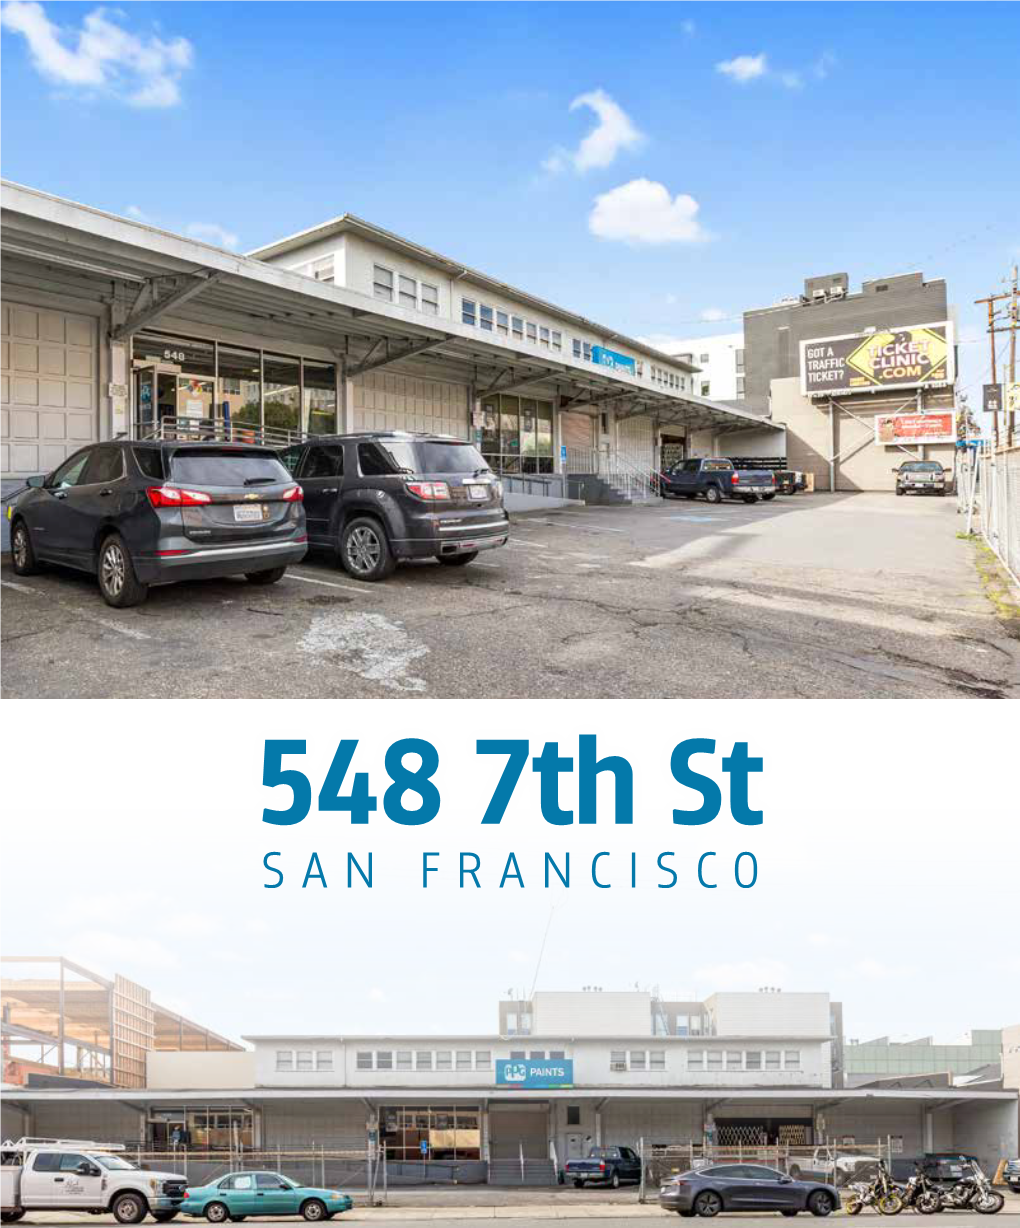 SAN FRANCISCO Great Investment Opportunity!